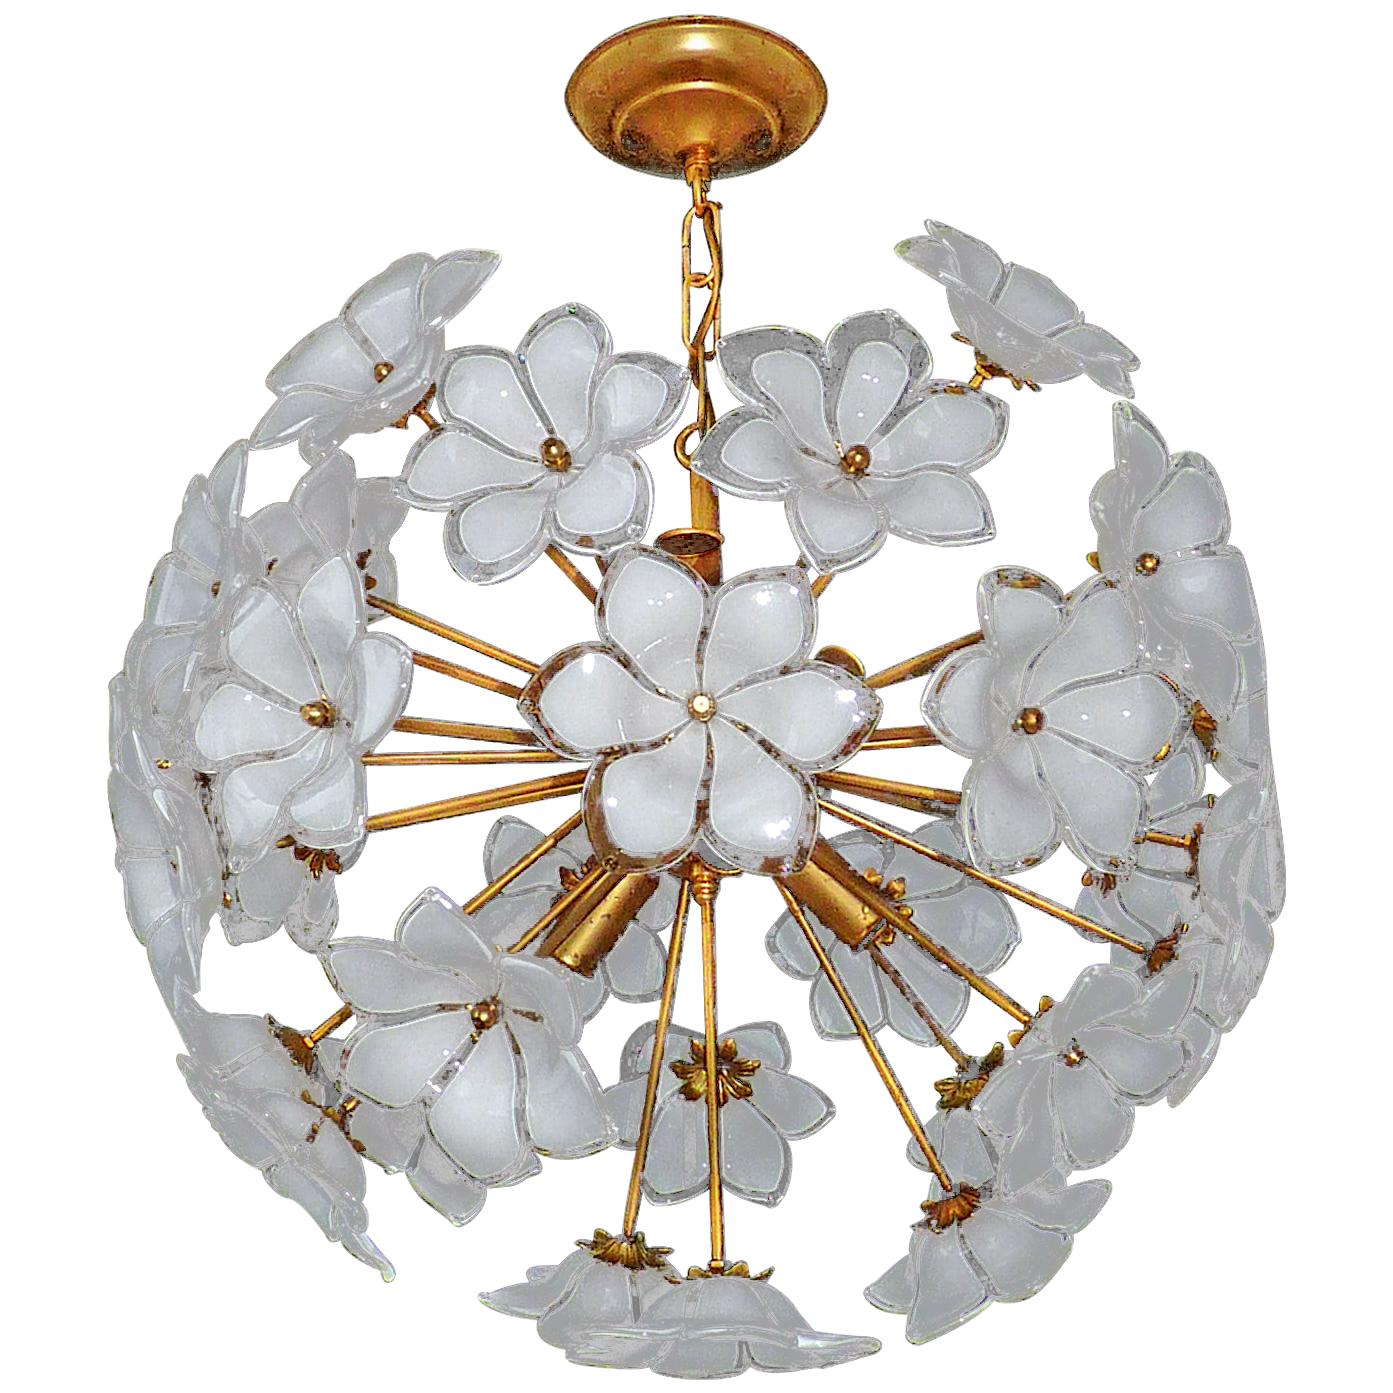 Vintage midcentury Italian Murano flower bouquet in the style of Venini. Art-glass with hand blown white and clear art glass flowers and gilt brass. Pair also available.
Measures:
Diameter 20 in/ 50 cm
Height 27.5 in (chain=70 cm
Weight 16 lb/7